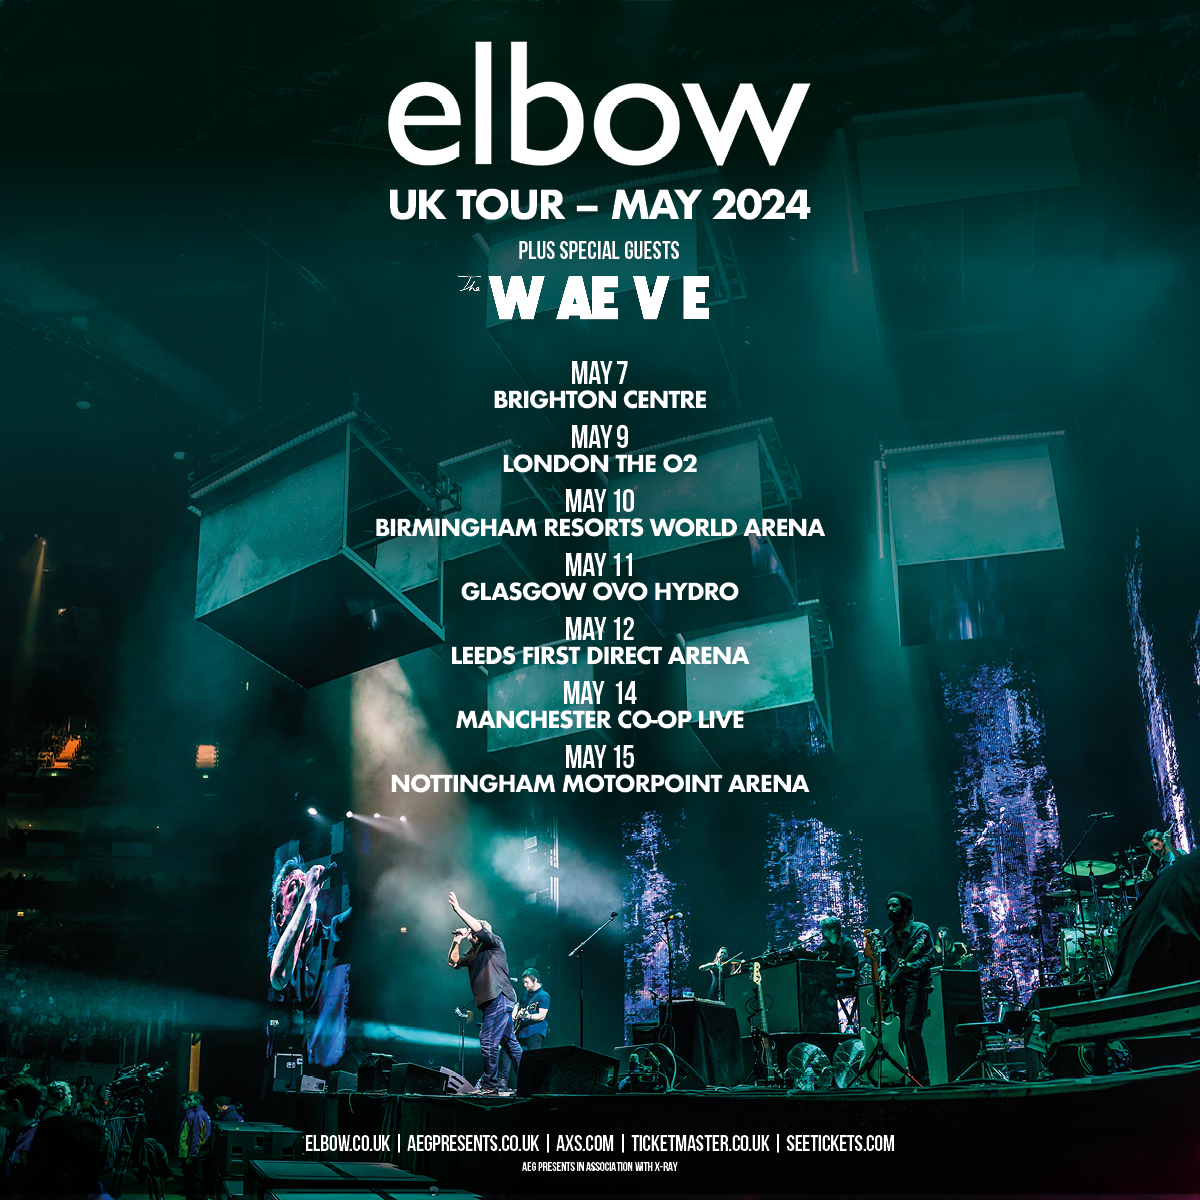 The WAEVE will be supporting @Elbow on their UK arena tour in May 2024. Tickets on sale now. aegpresents.co.uk/event/elbow/